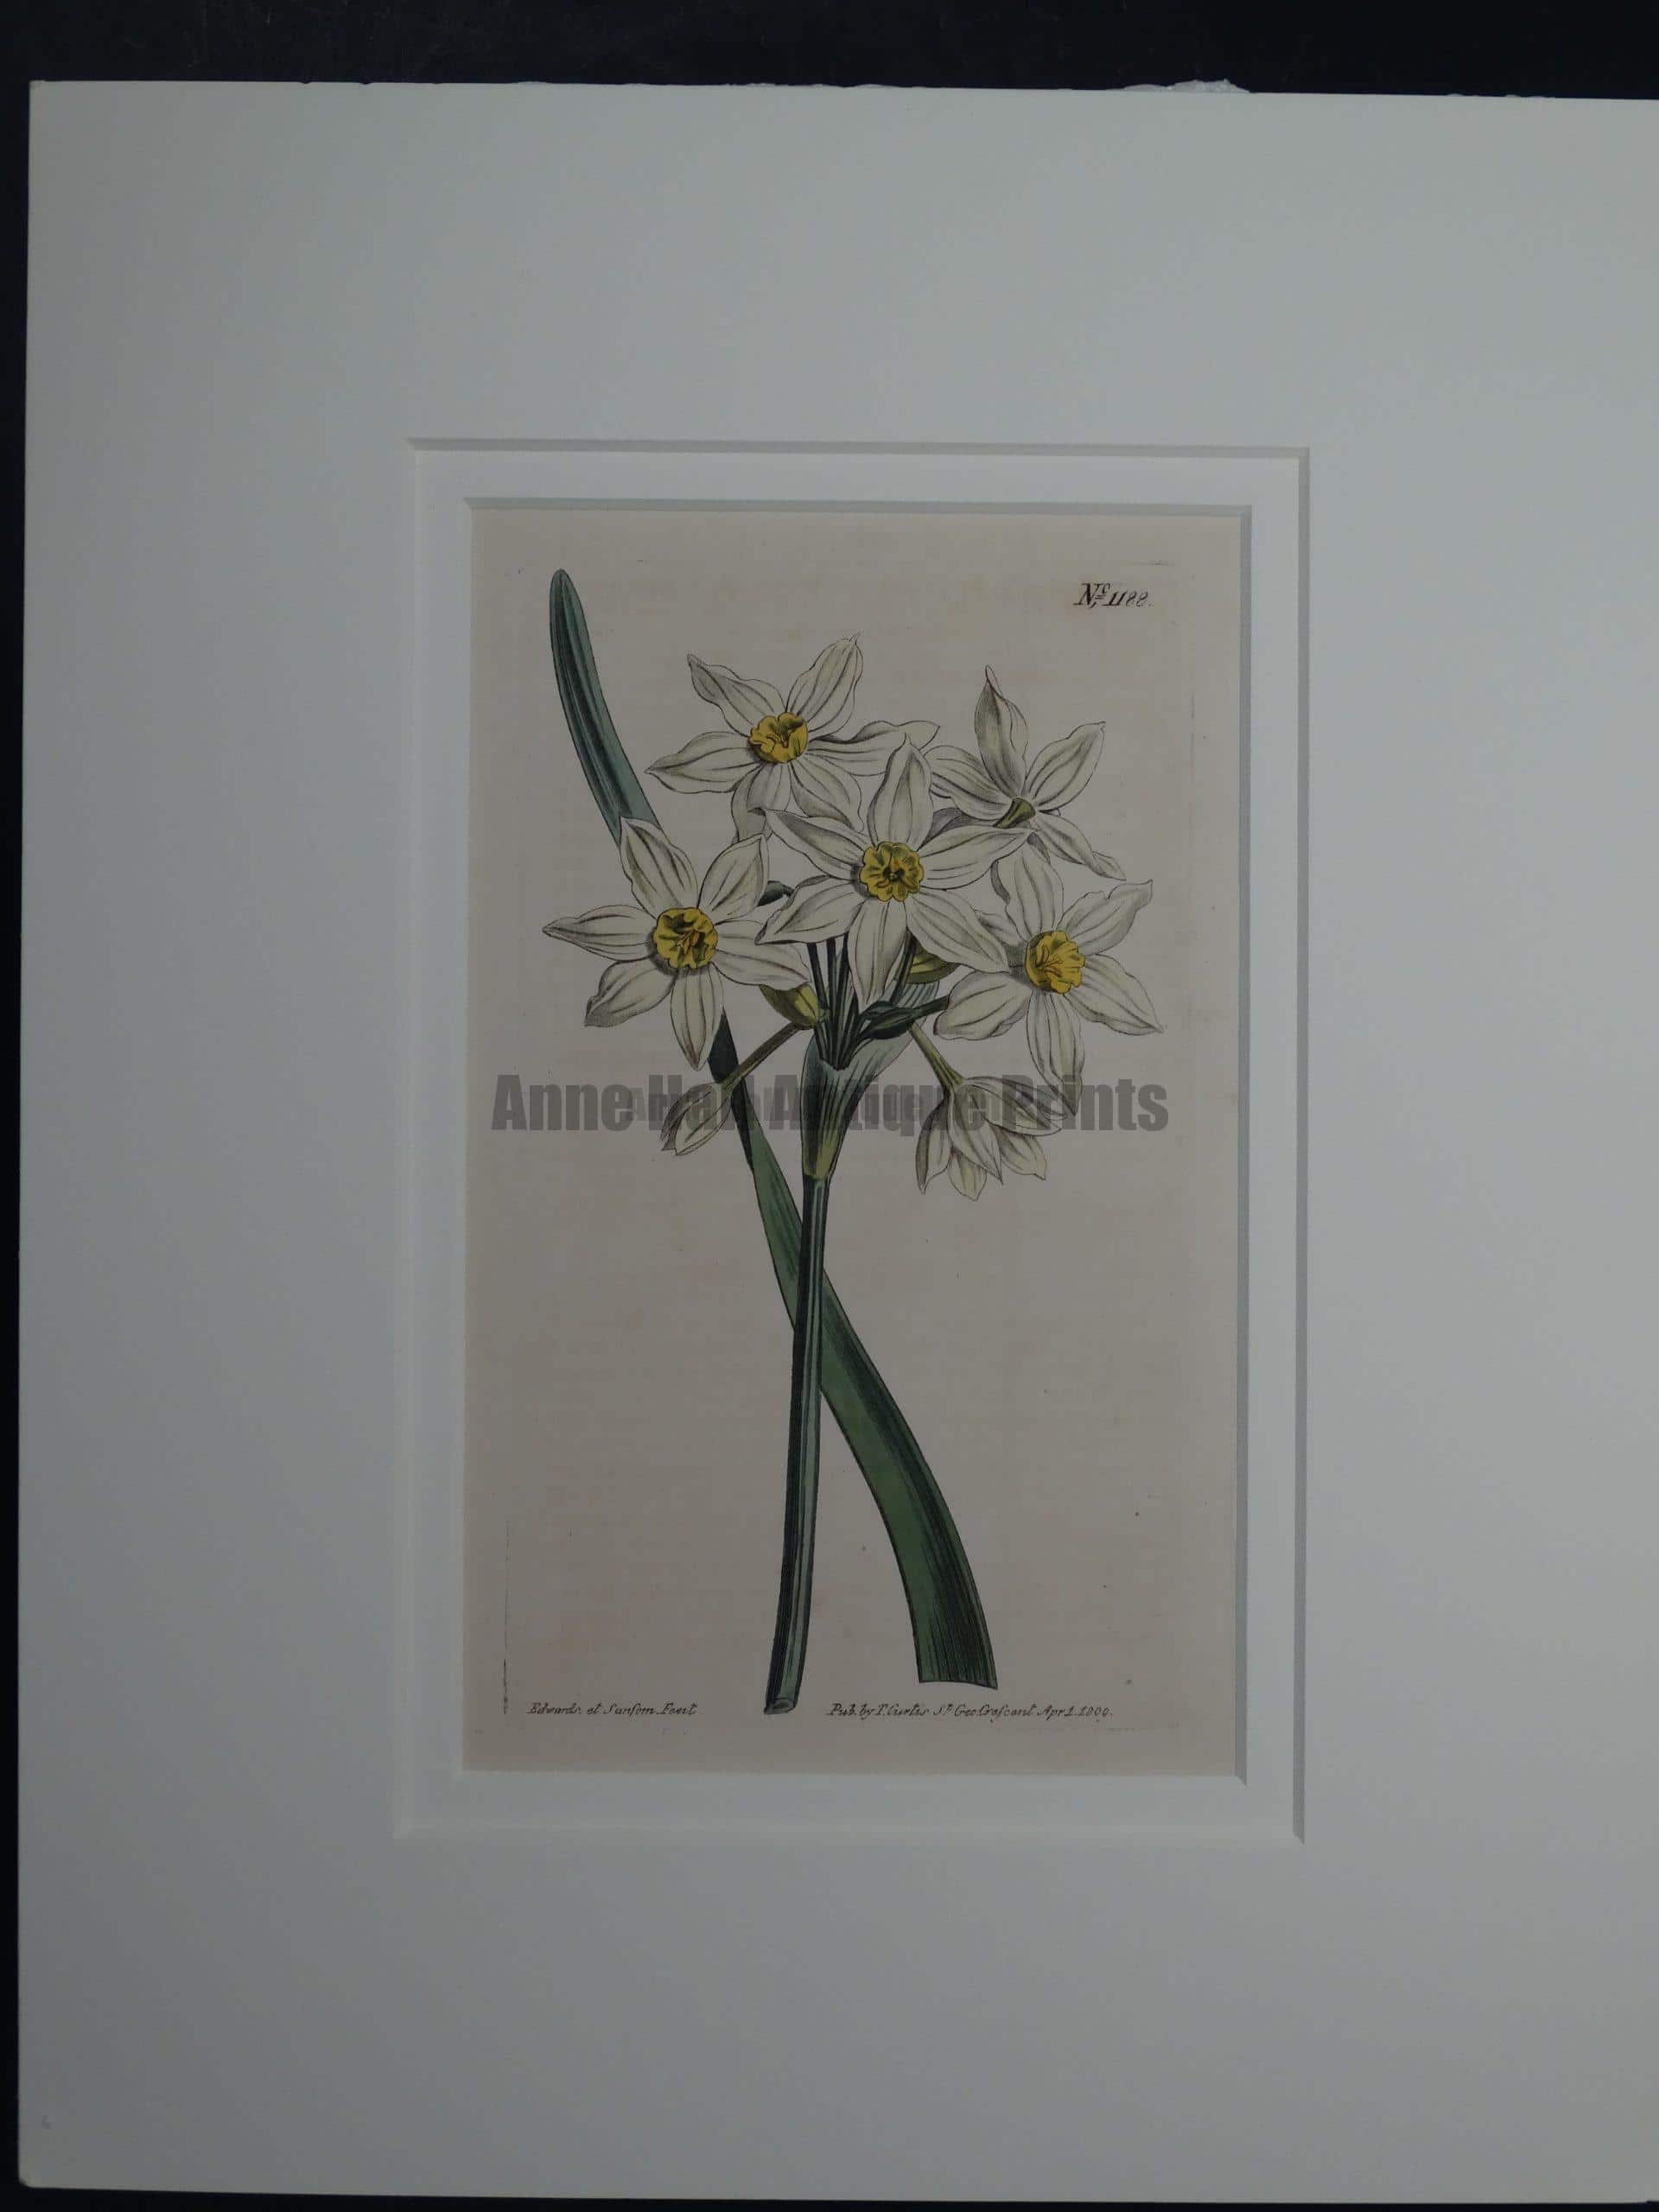 approximately 200 year old watercolor engraving of narcissus plate 1188.